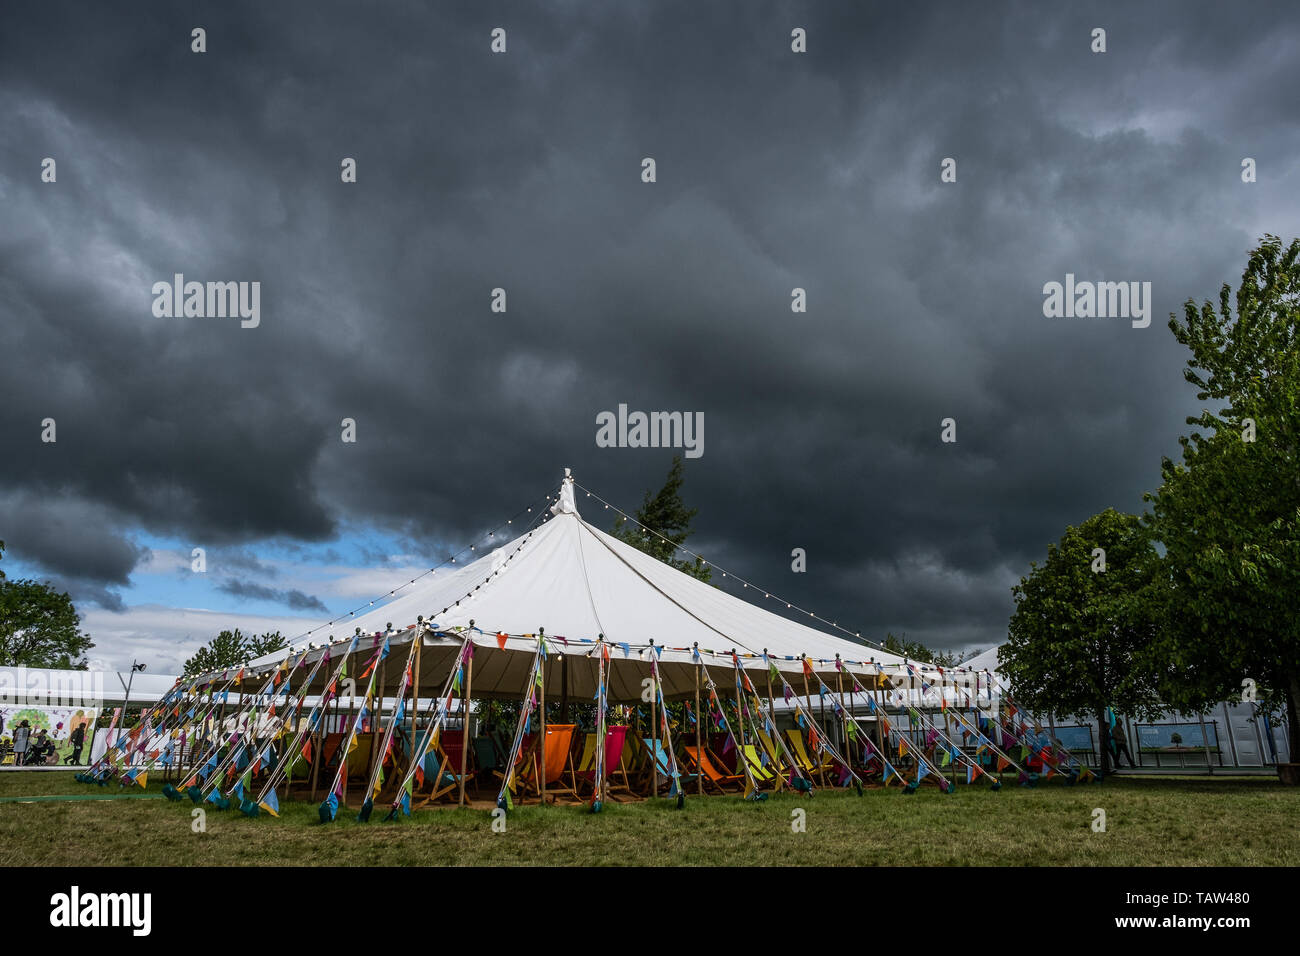 The Hay Festival, Hay on Wye, Wales UK, Tuesday 28th May 2019. Dark looming storm clouds tower over one of the marquees at the 32nd annual Hay Festival of Literature and the Arts. The festival, held every year in the small town of Hay on Wye on the Wales - England border, attracts the finest writers, politicians and intellectuals from across the globe for 10 days of celebration of the best of the written word and critical debate Photo Credit: Keith Morris/Alamy Live News Stock Photo